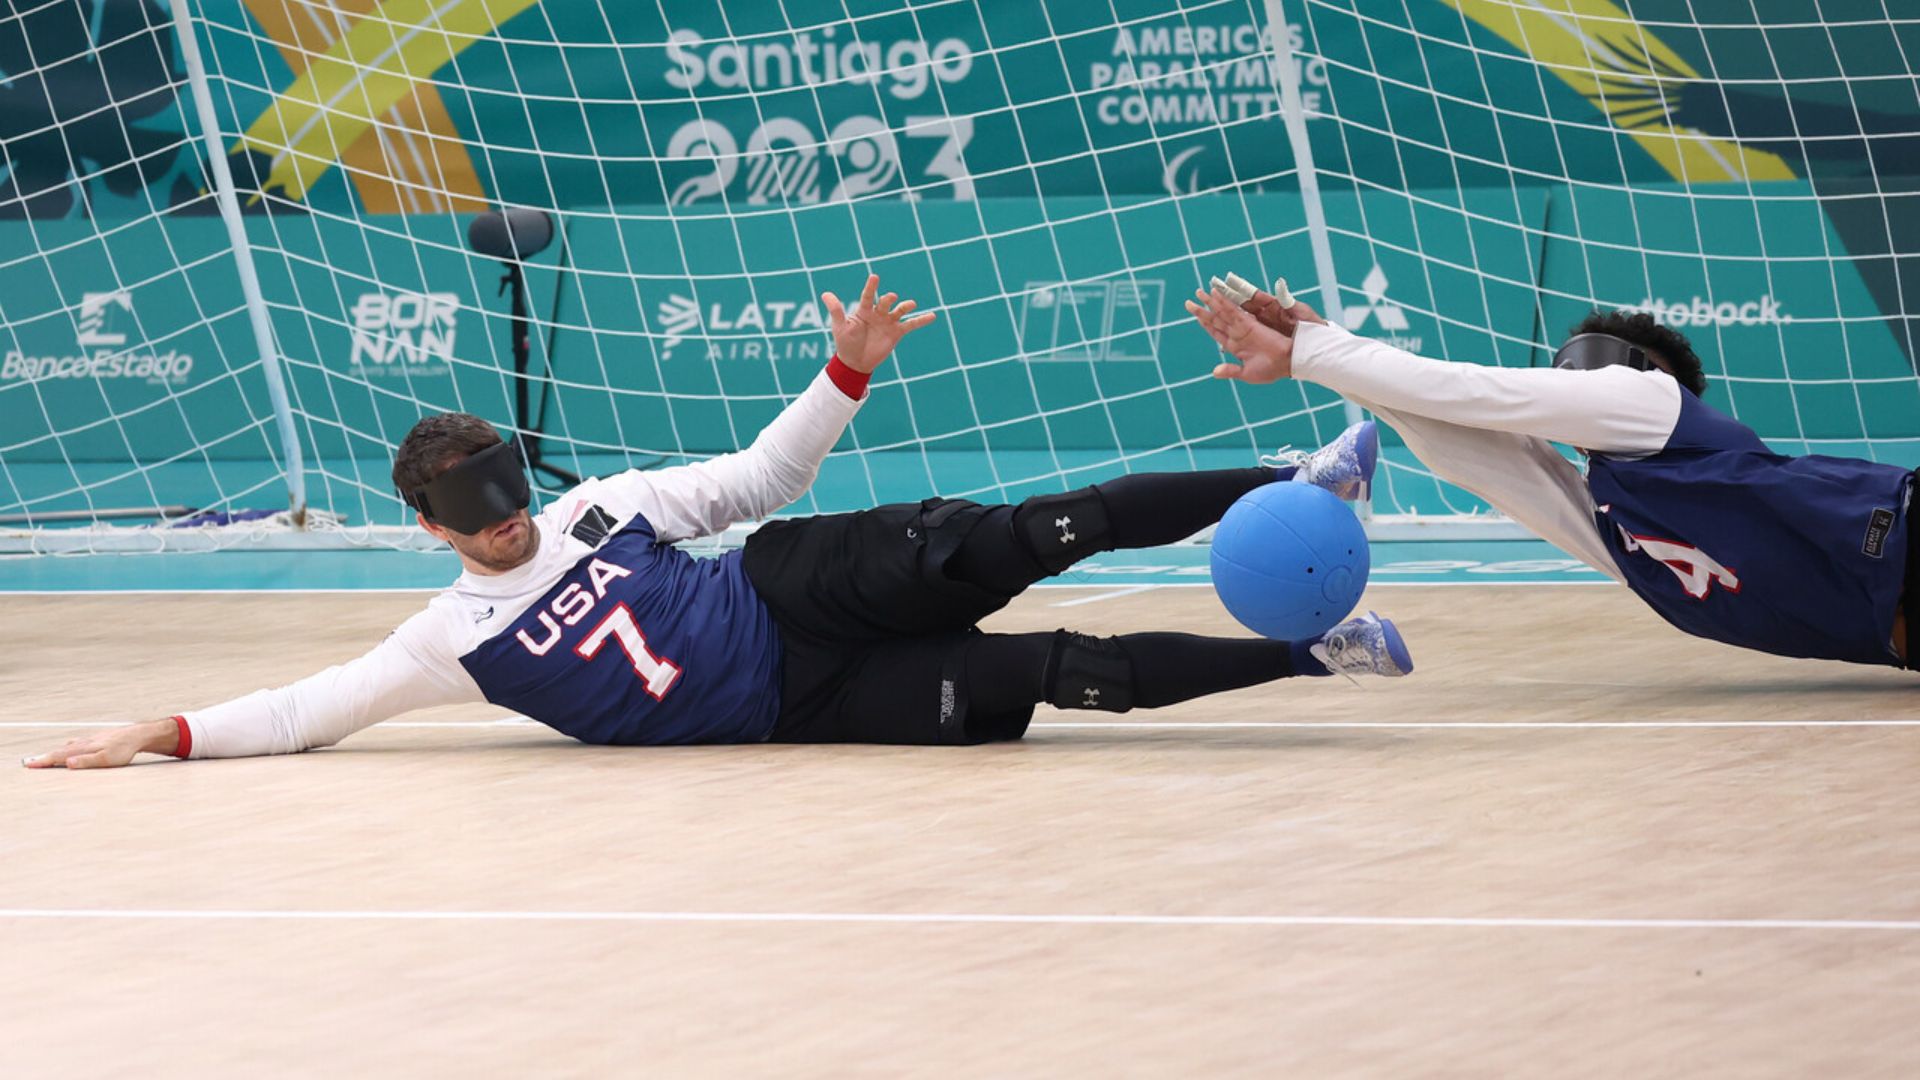 United States Defeated Argentina and Remains Undefeated in Male Goalball